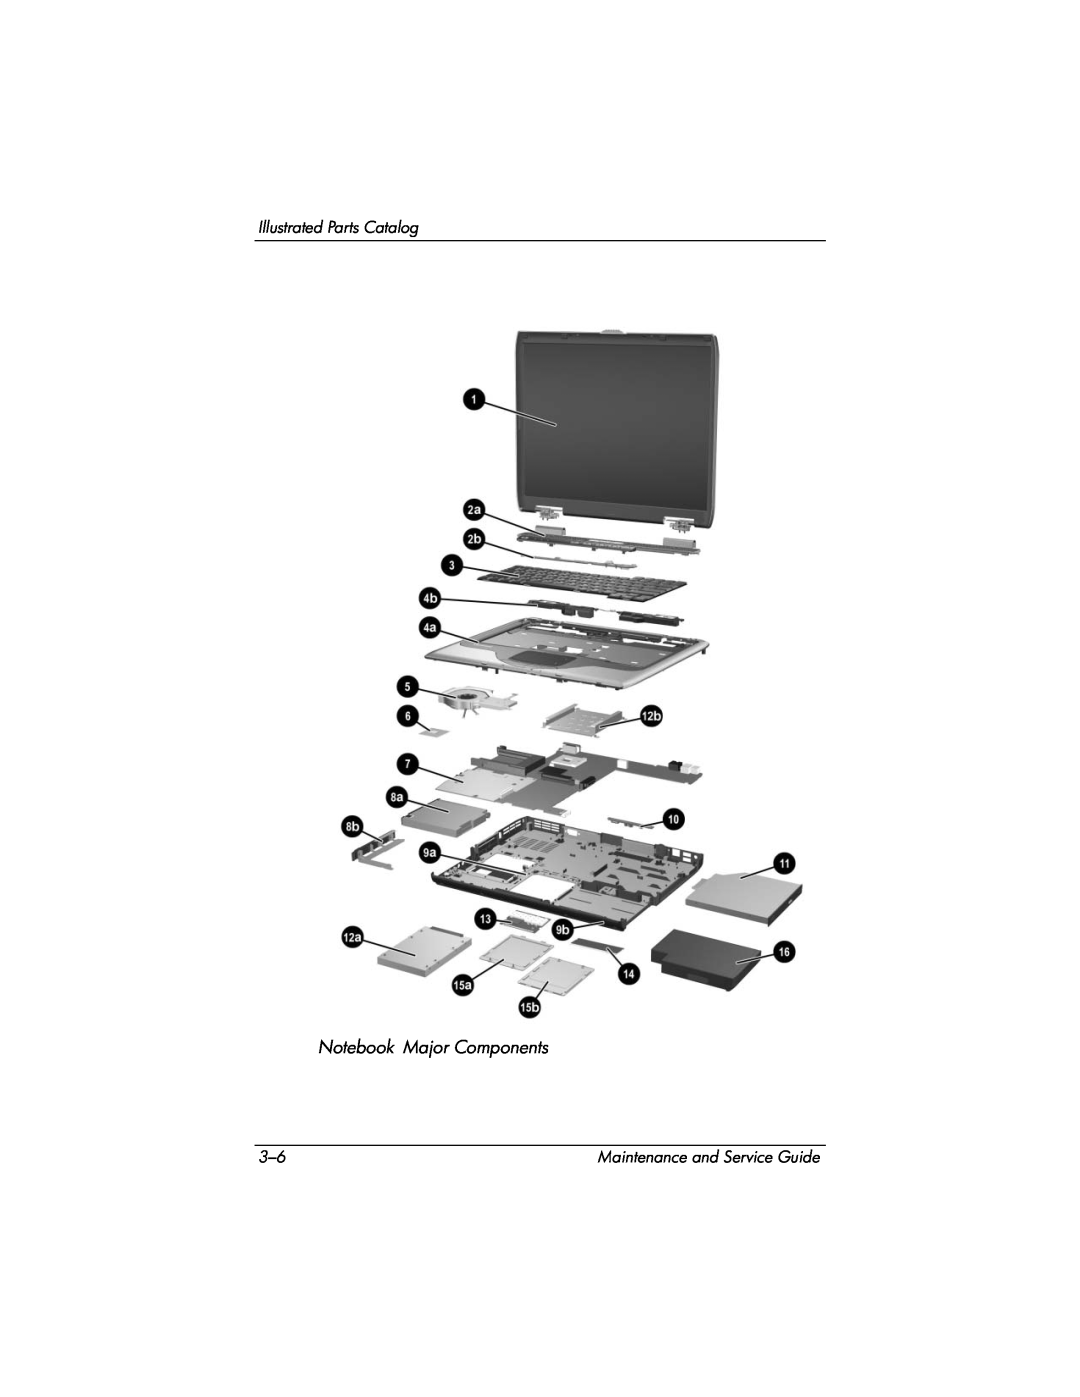 HP NX9040, NX9030, NX9020, ZE4900 manual Notebook Major Components, Illustrated Parts Catalog, Maintenance and Service Guide 